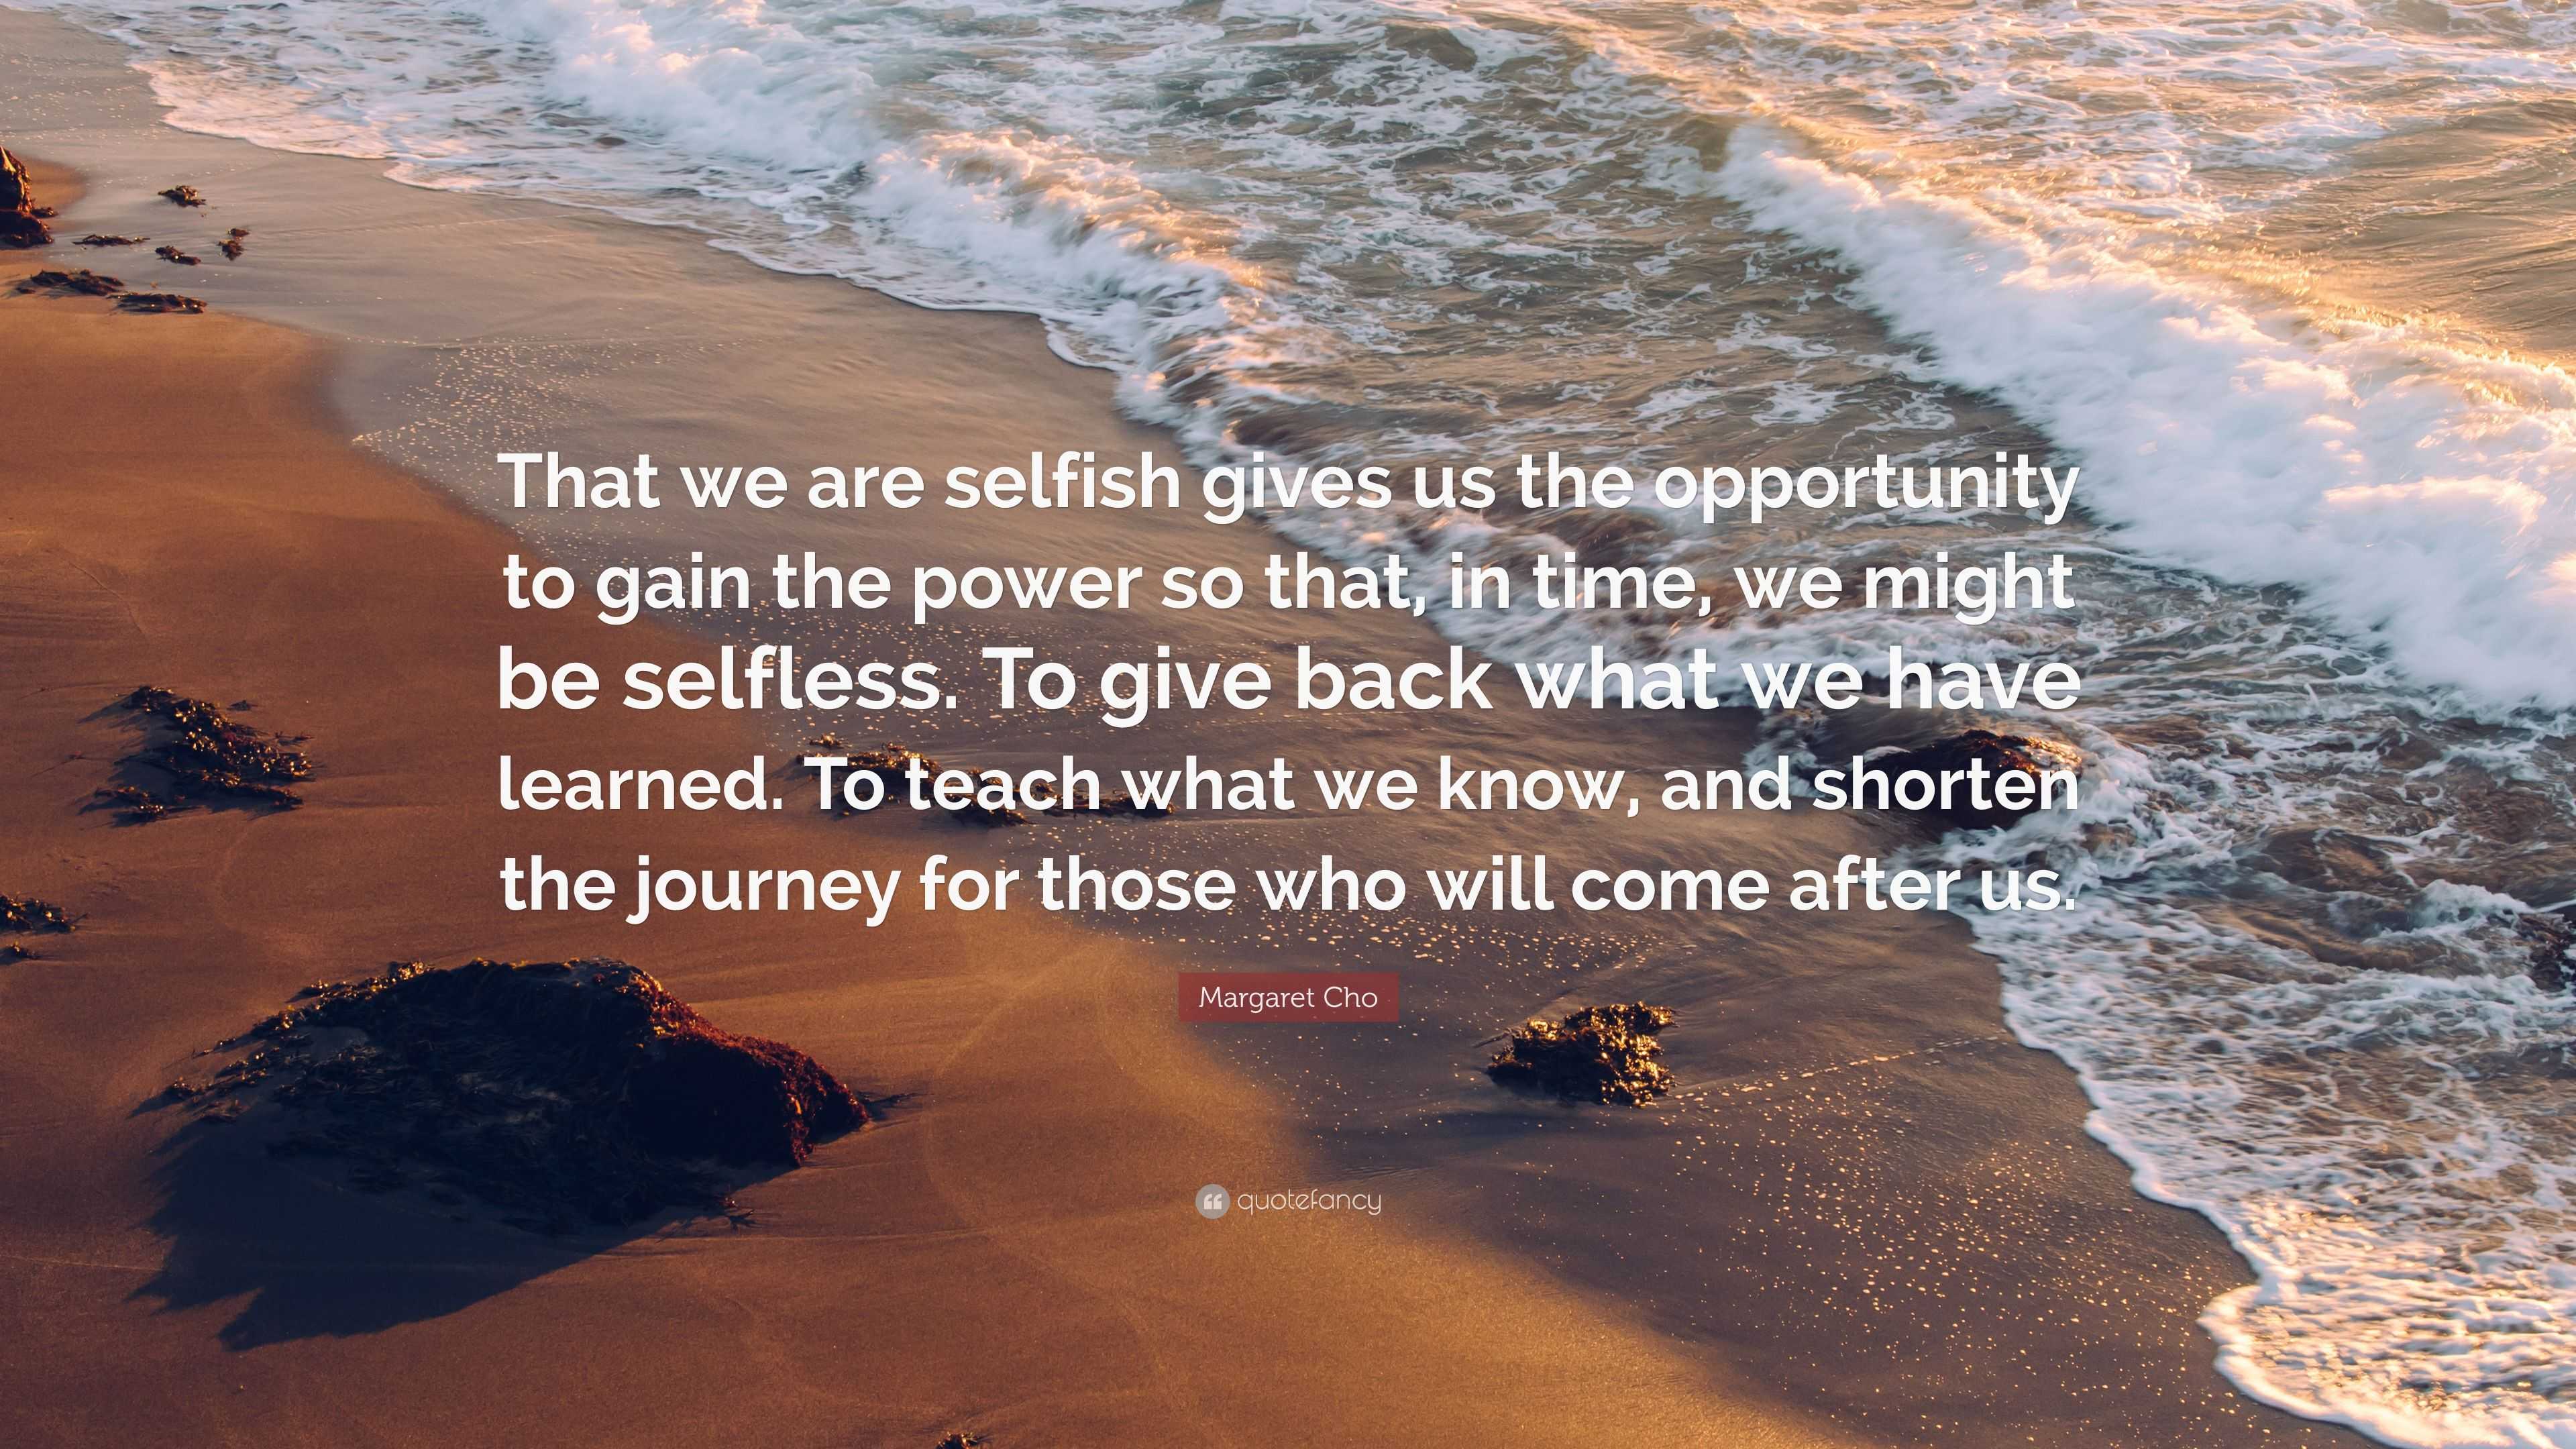 Margaret Cho Quote: “That we are selfish gives us the opportunity to ...